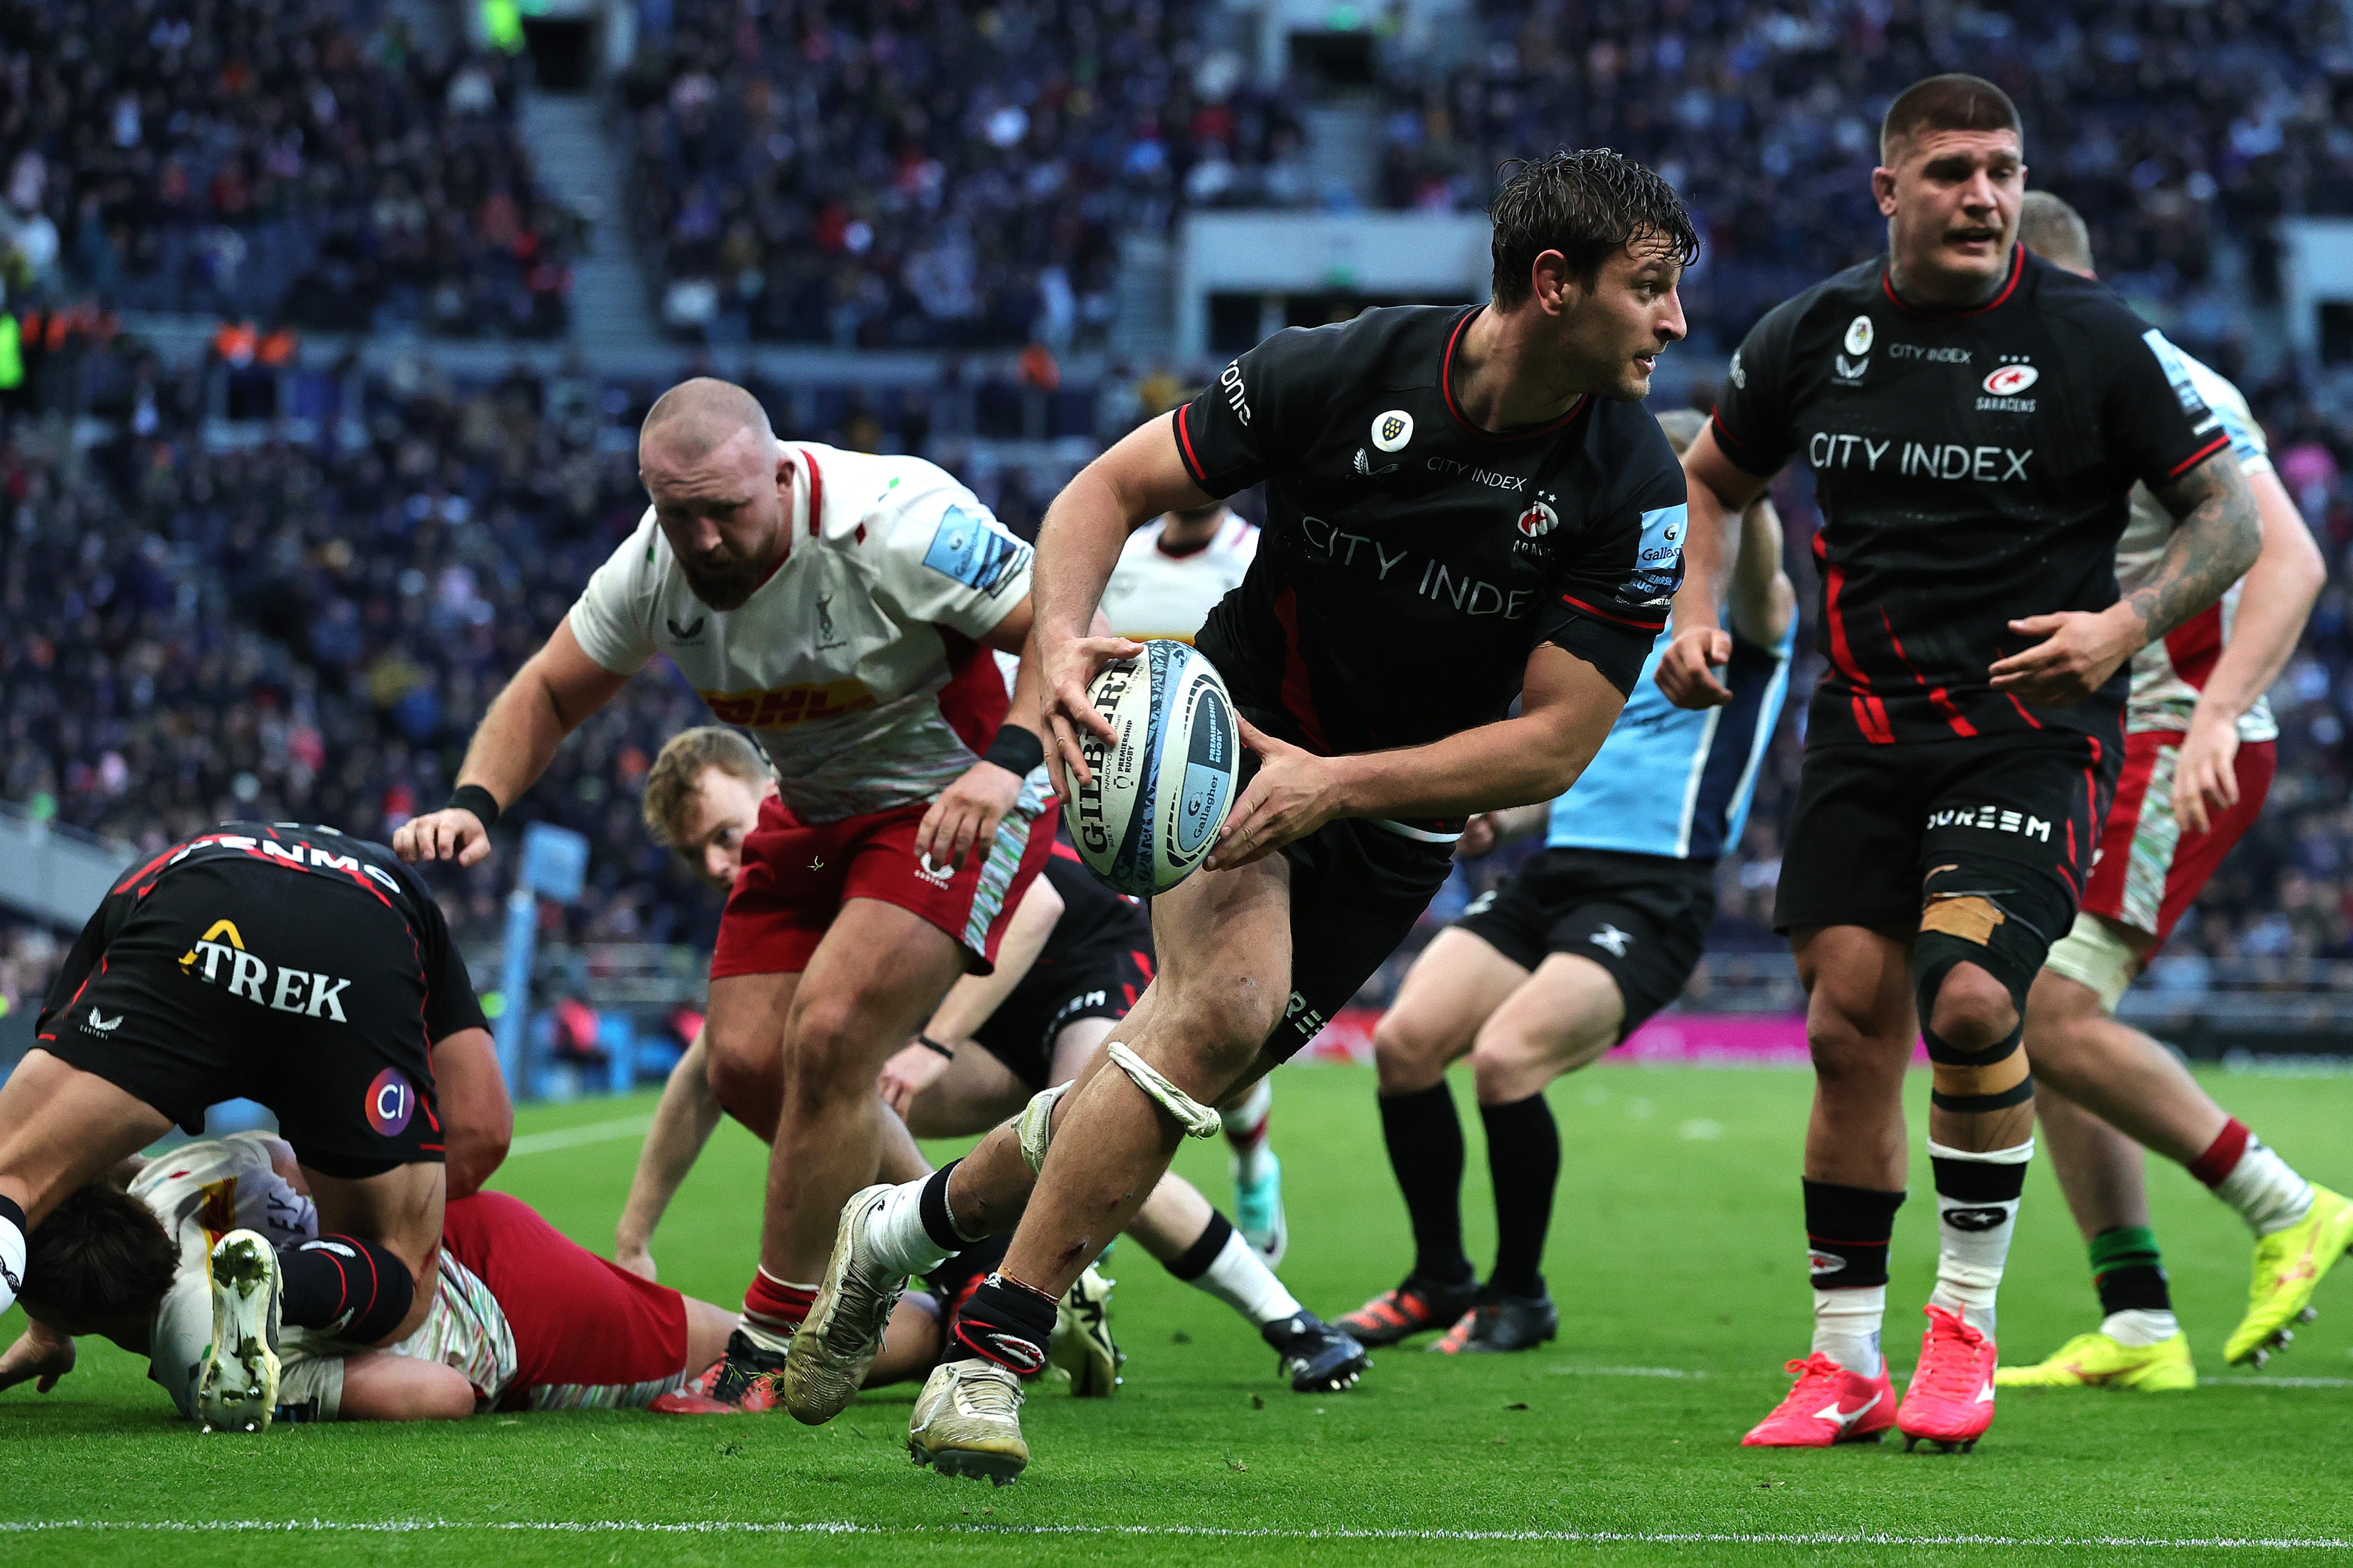 The incident occurred while Juan Martin Gonzalez was scoring for Saracens